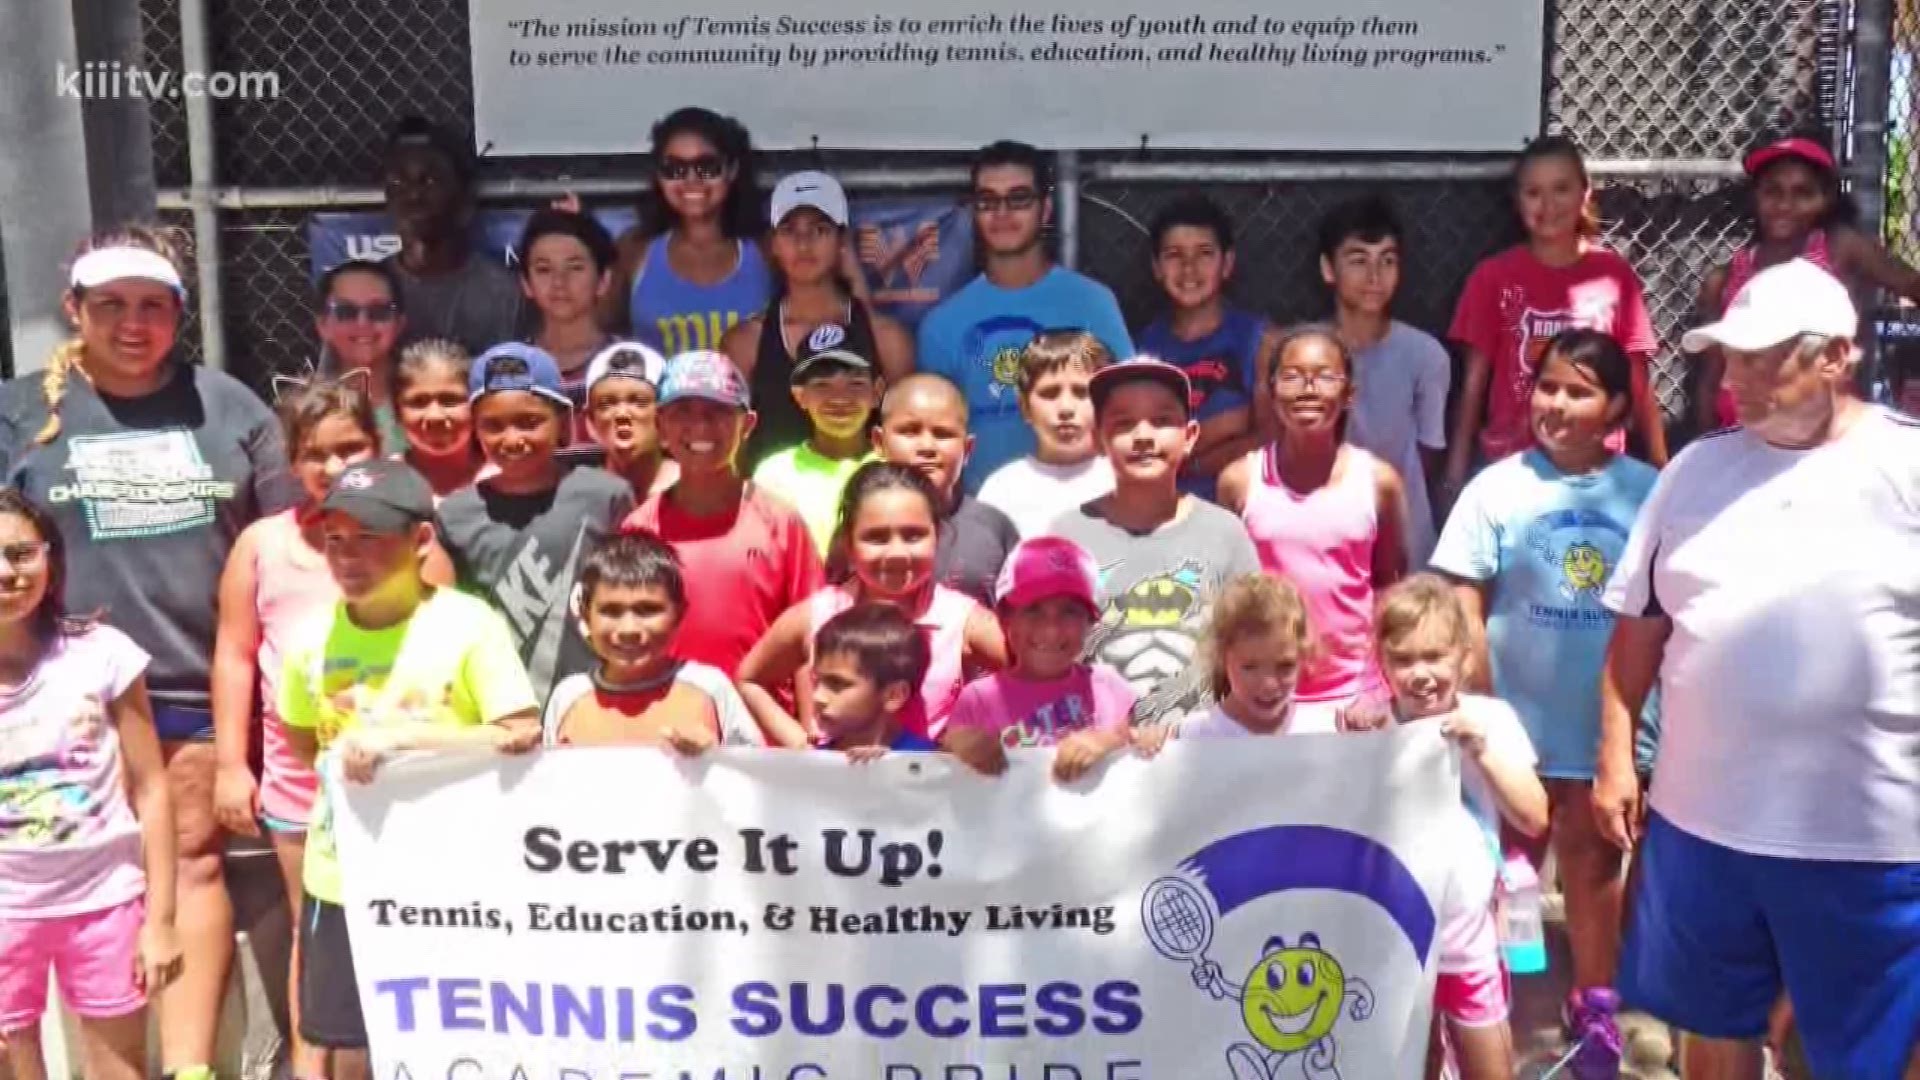 Money raised from this event goes toward funding the tennis, education program and college scholarships for under-served and at-risk youth graduating from the Tennis Success Program.